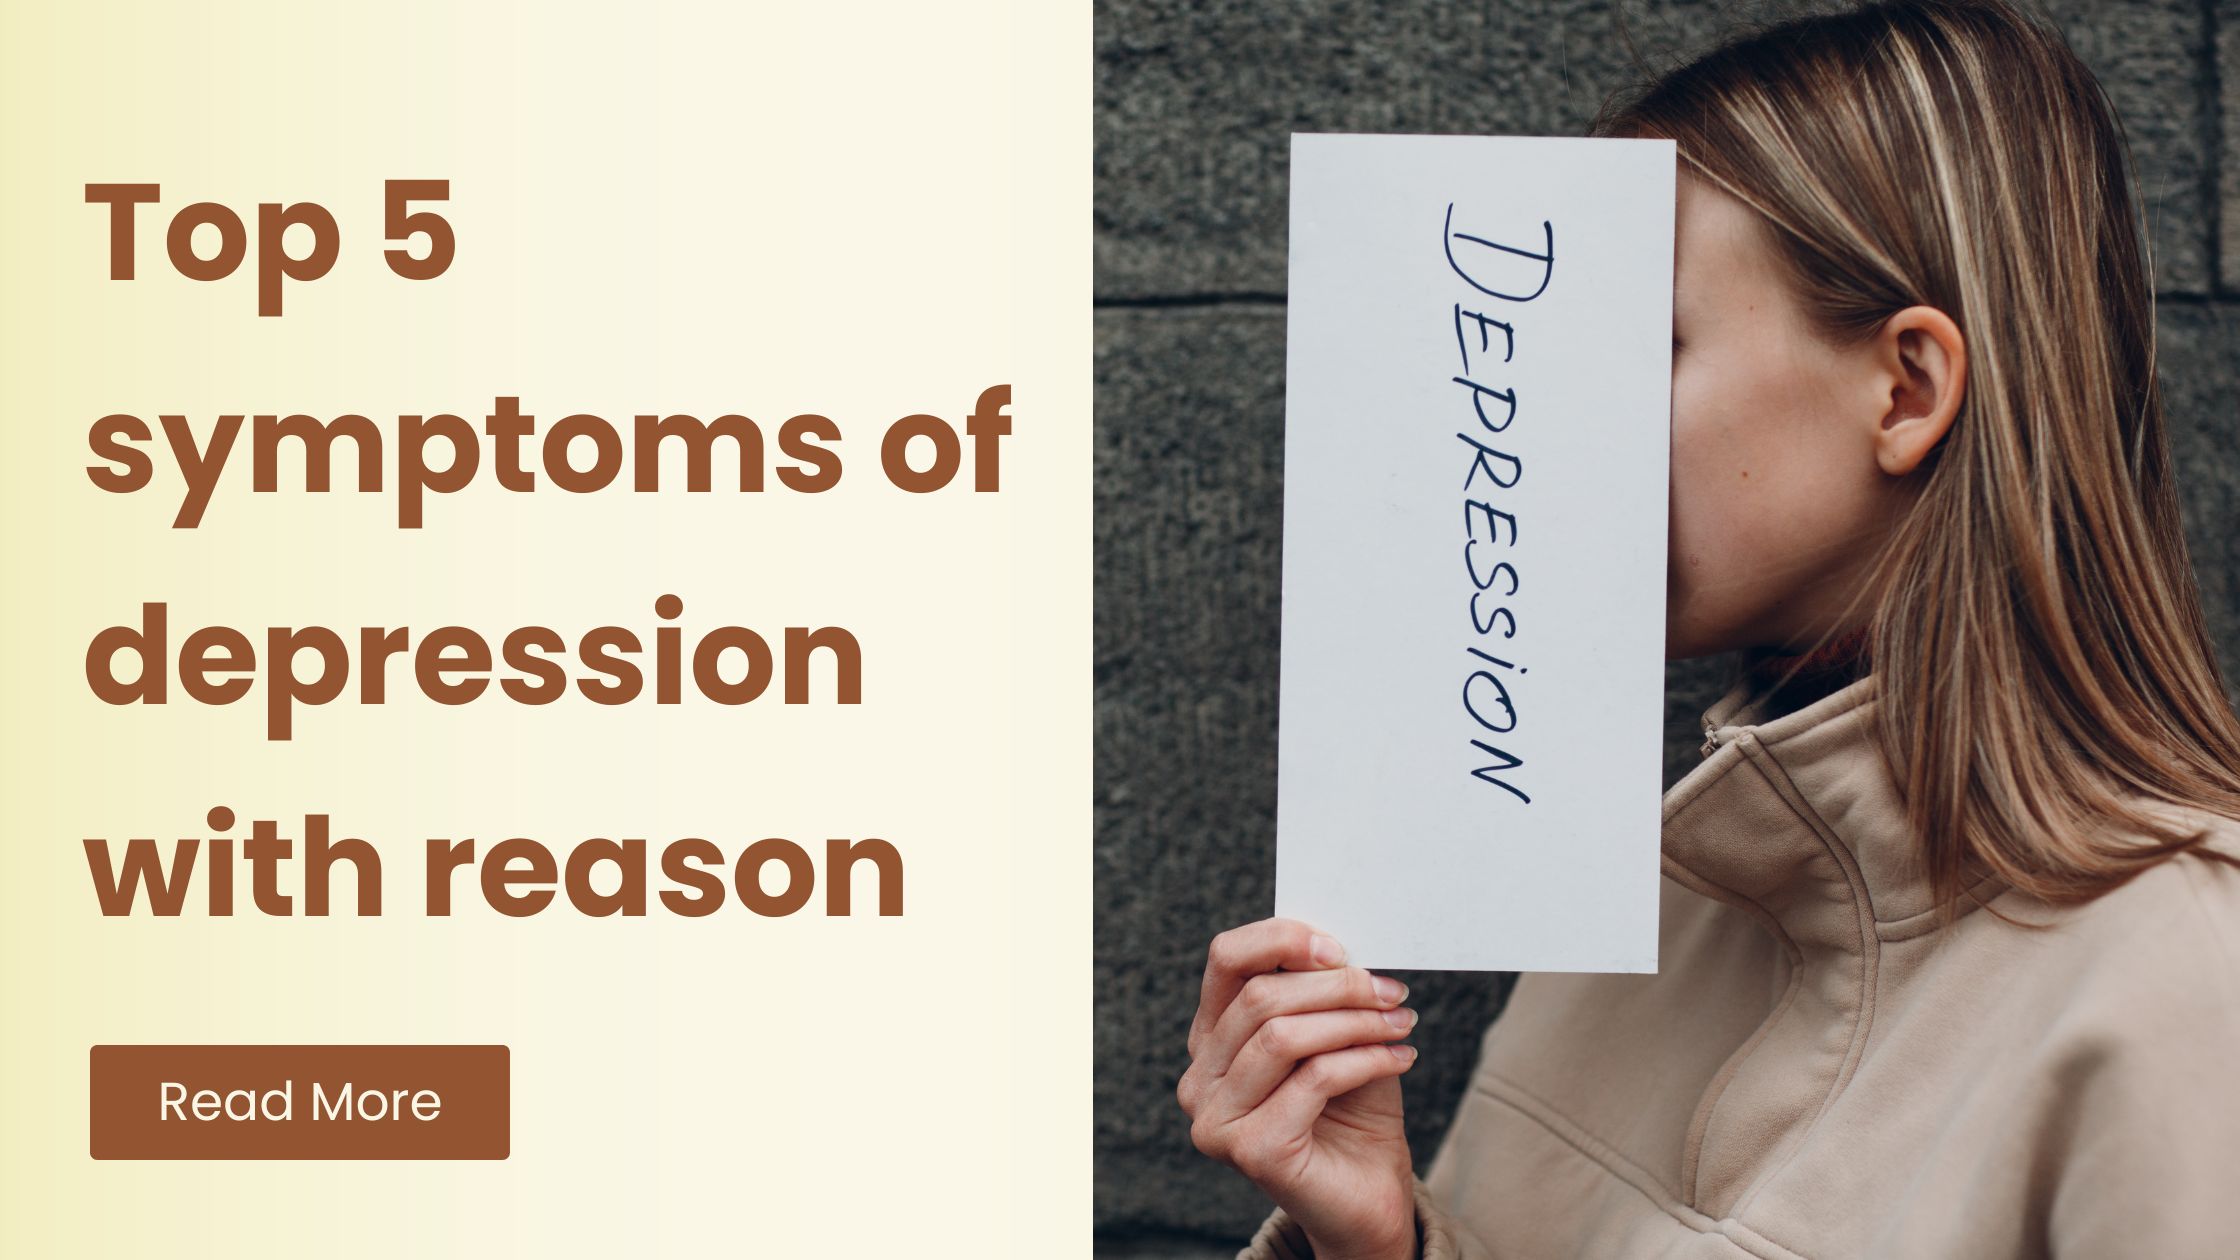 Top 5 symptoms of depression with reason